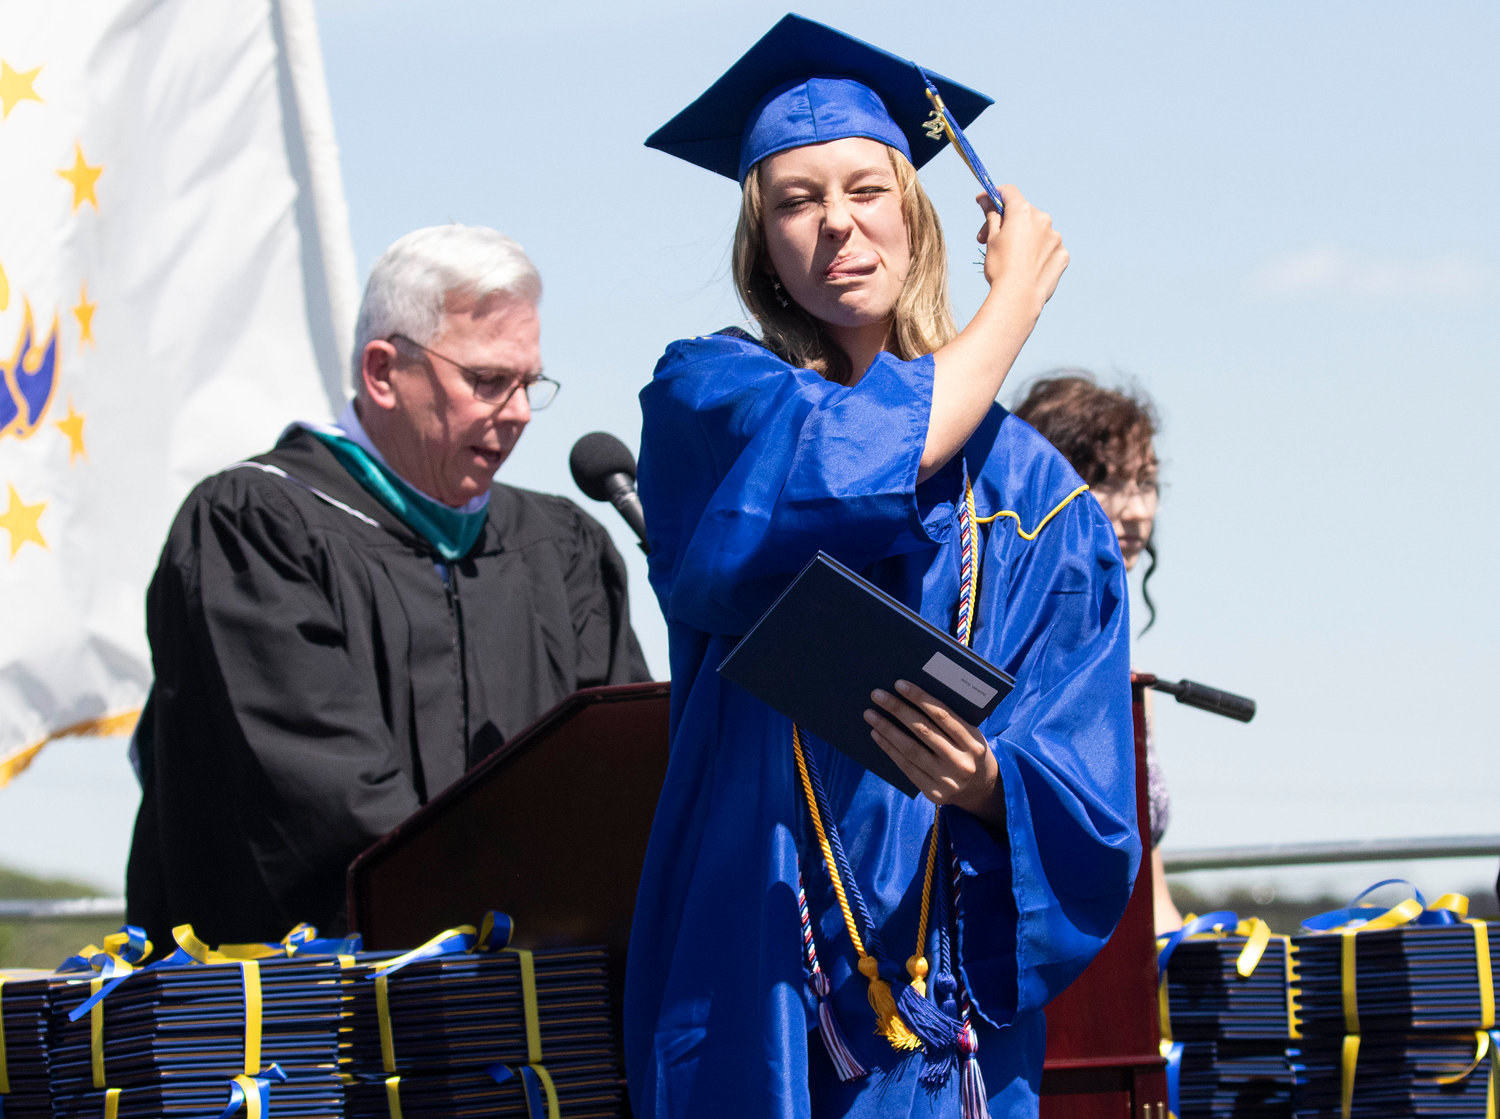 A Barrington High School graduate sticks out her tongue during the graduation ceremony at Victory Field on Sunday, June 5.